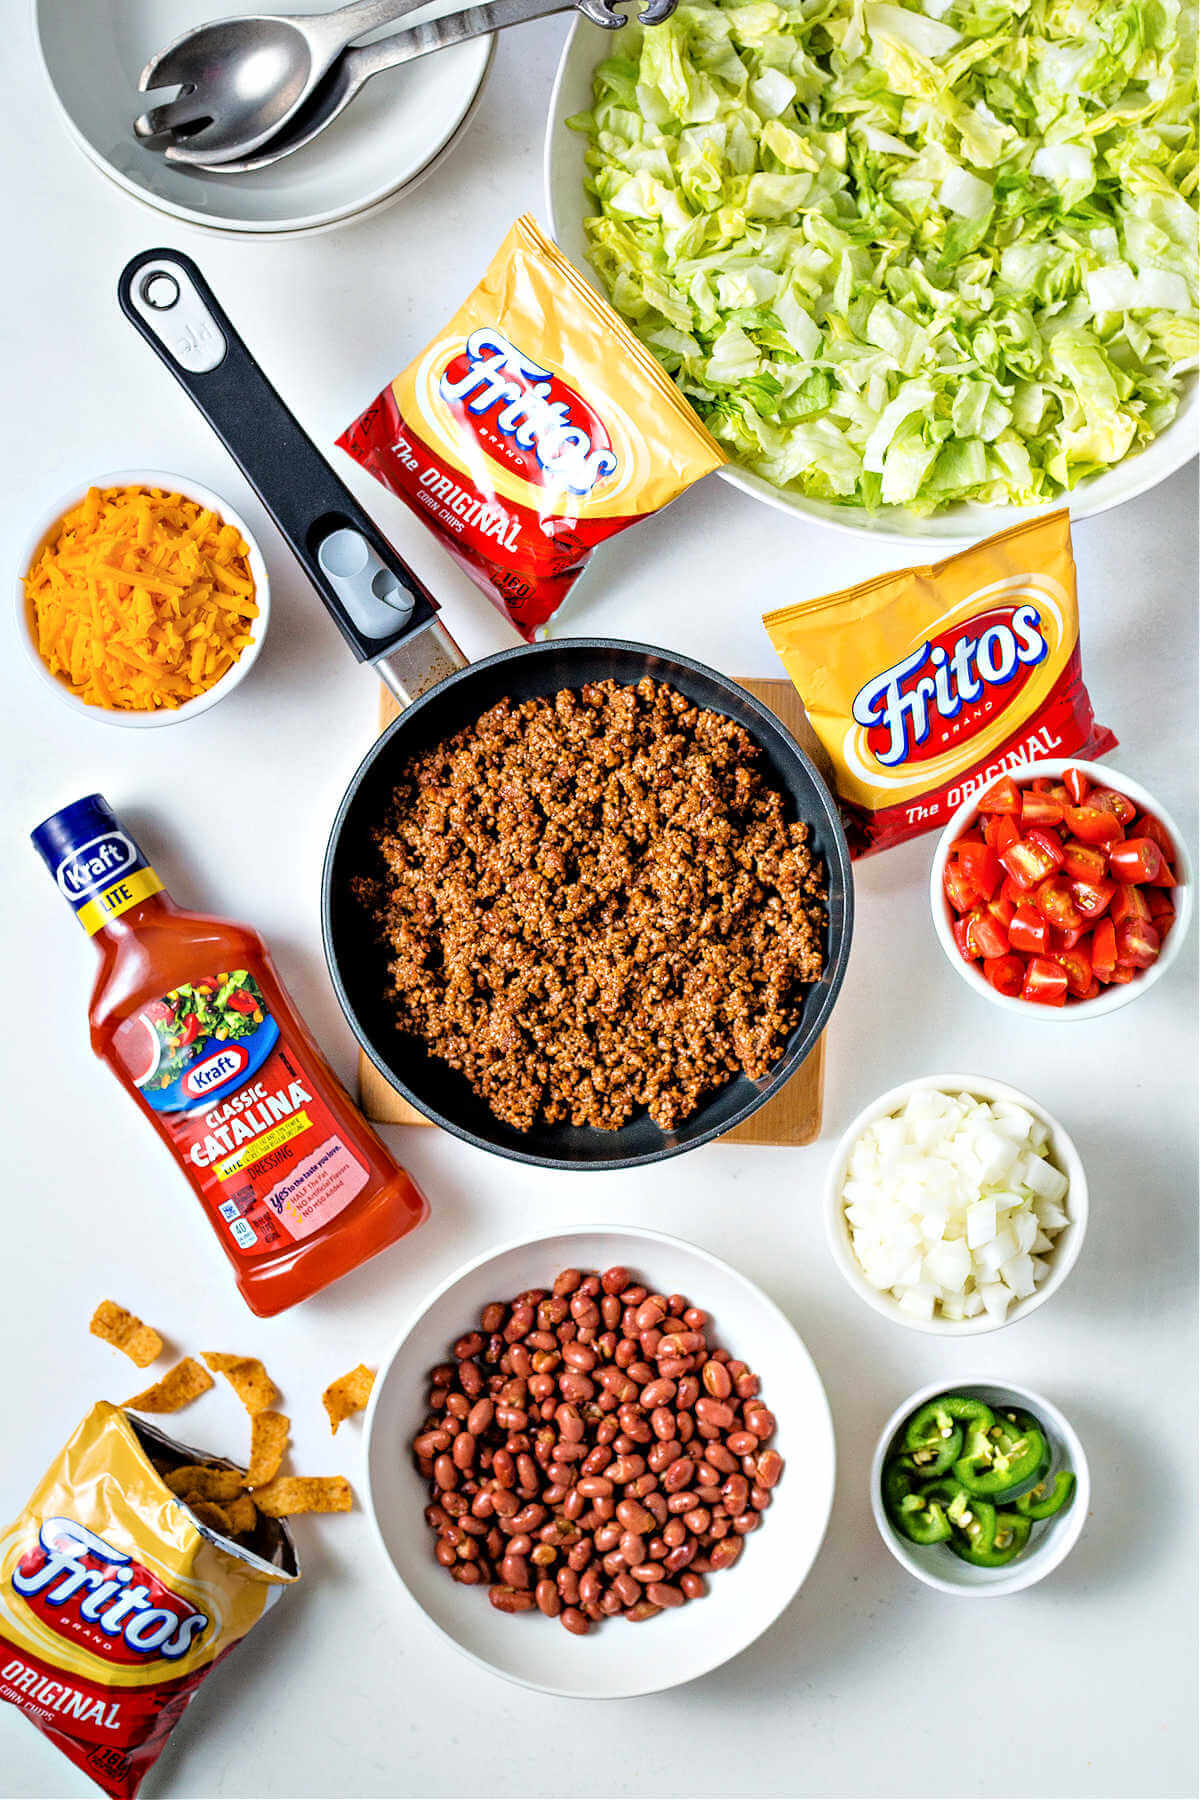 ingredients for making catalina taco salad on a table.